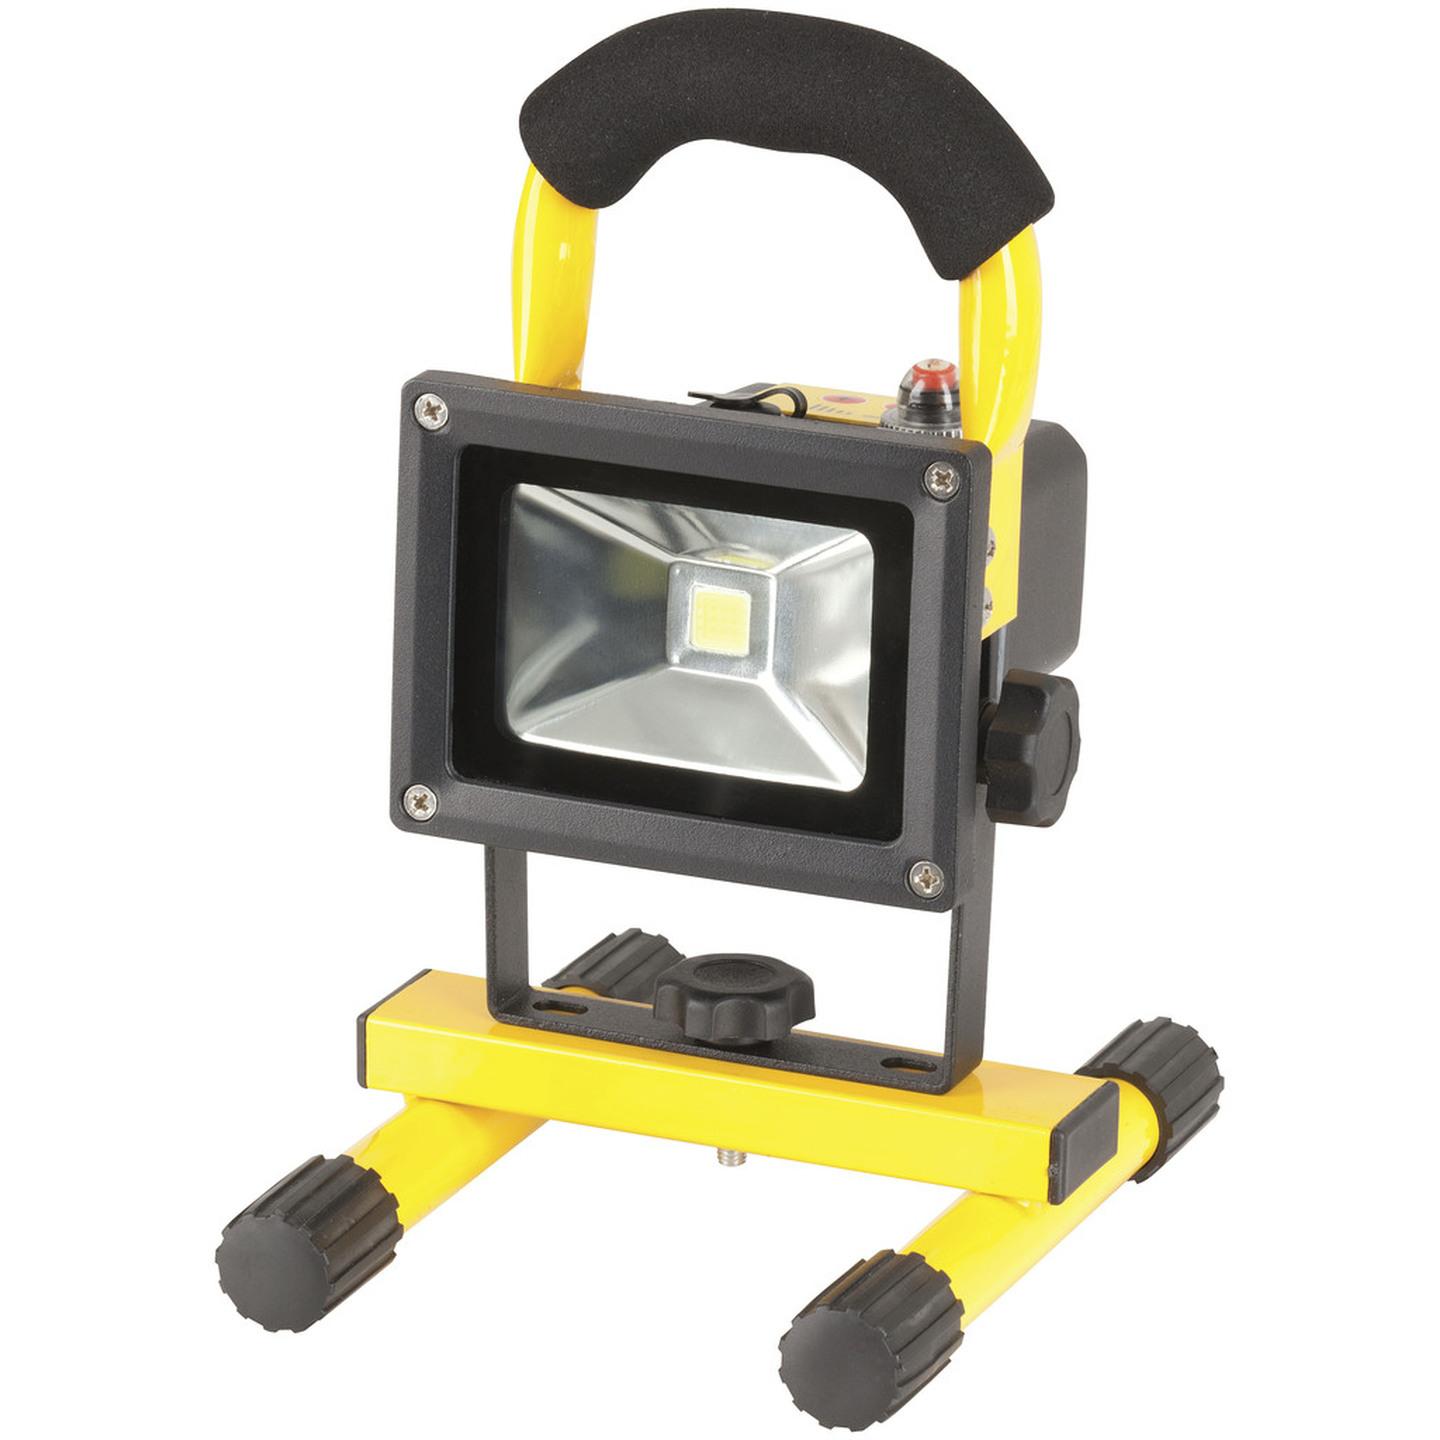 Dimmable 10W LED Work Light